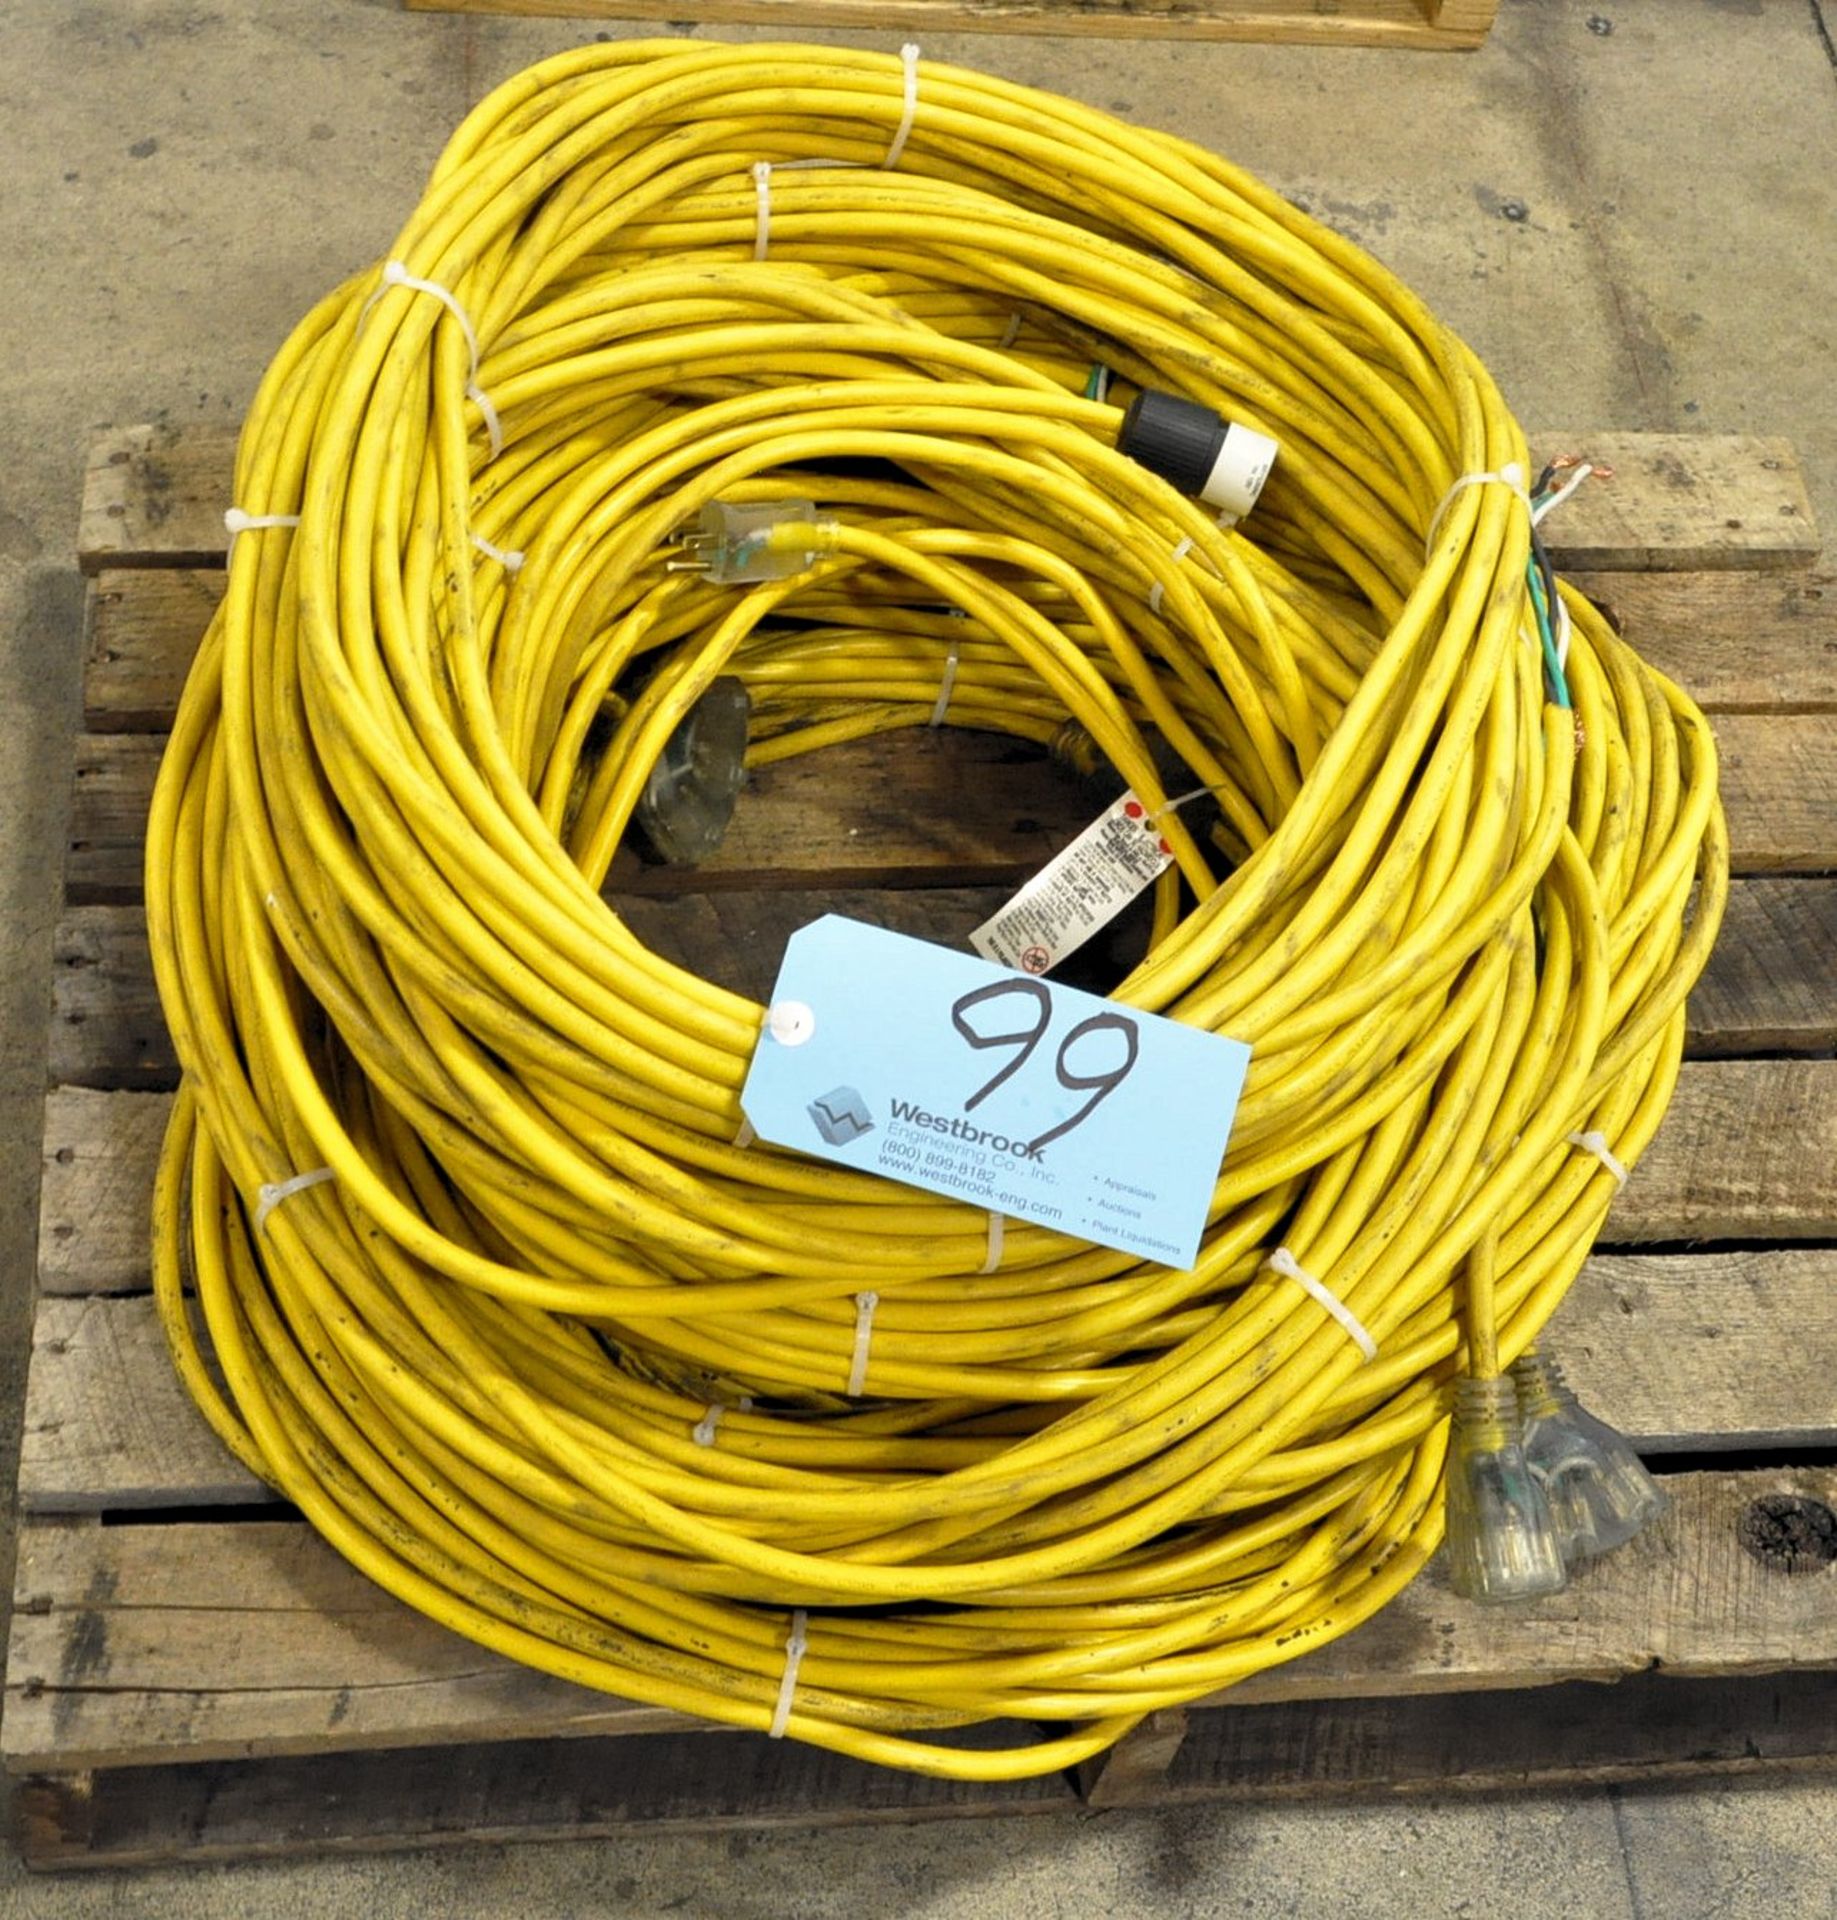 Lot-Extension Cords on (1) Pallet